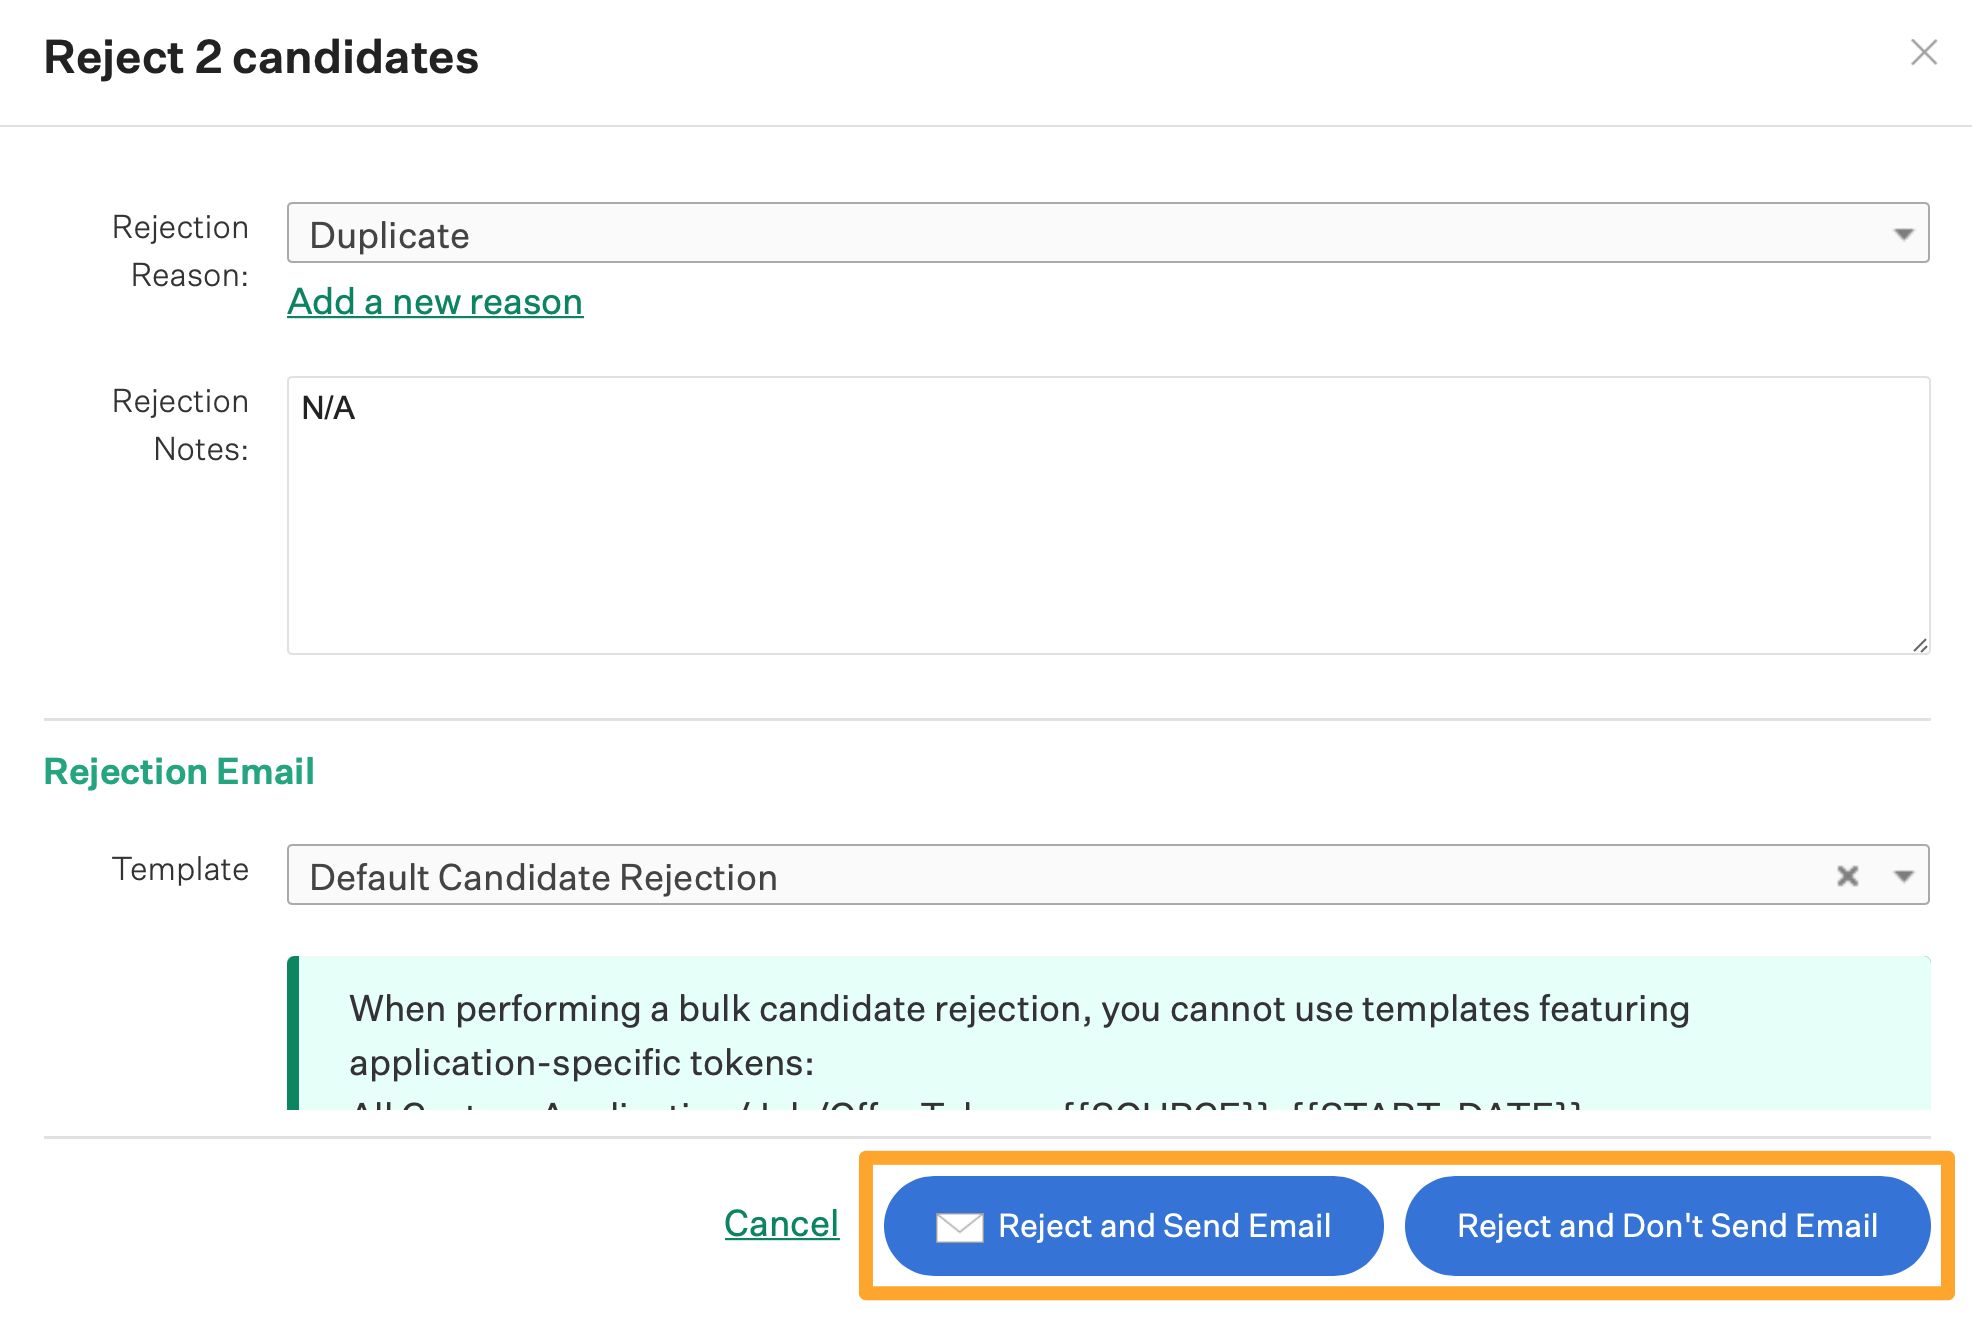 Screenshot of the reject candidates window